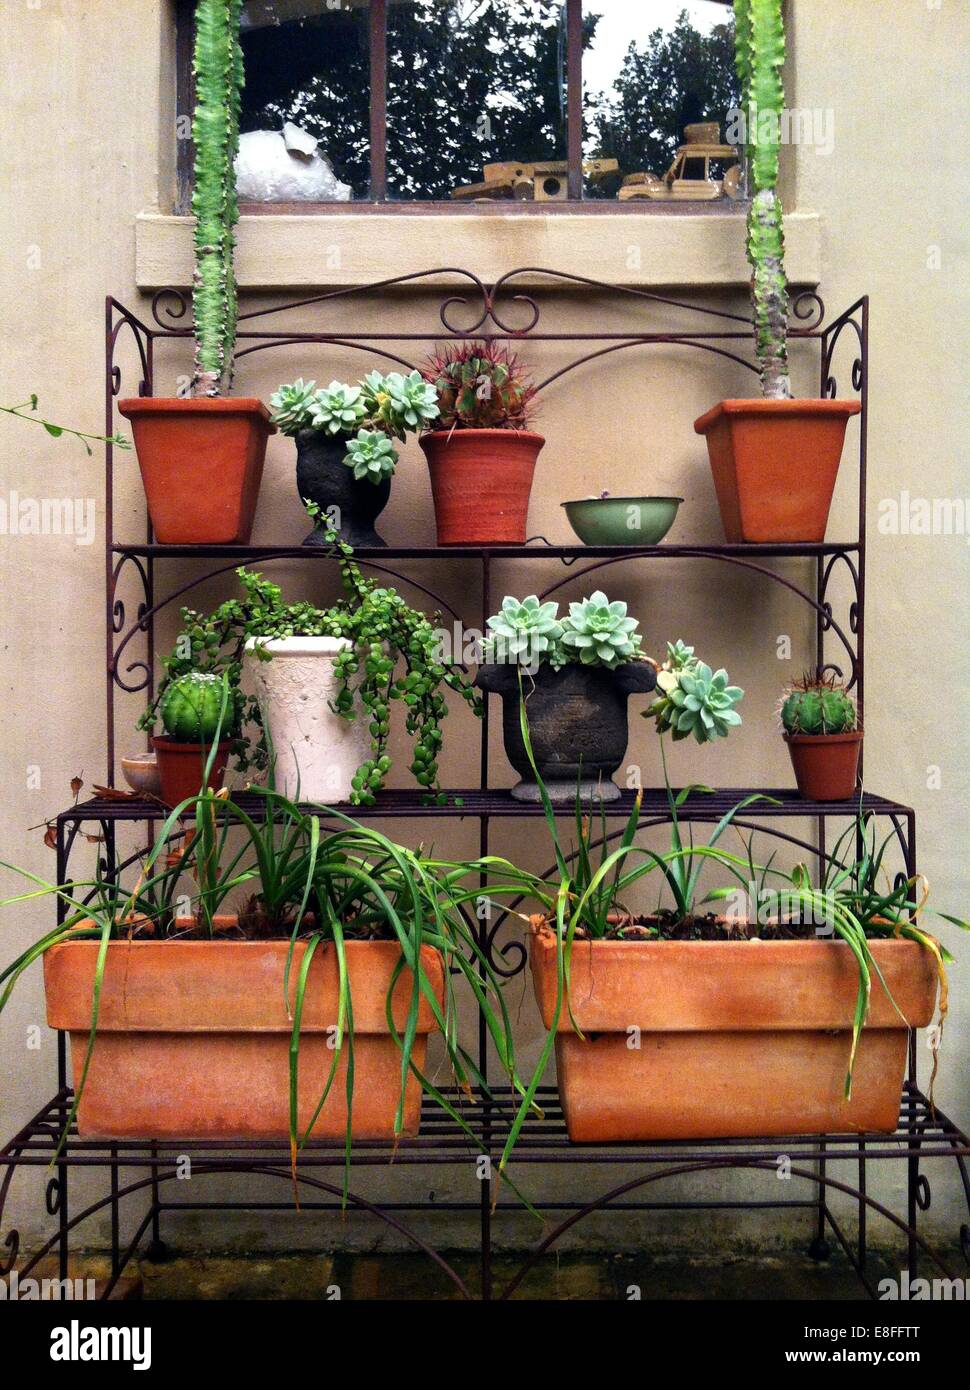 Potted plants on stand Stock Photo